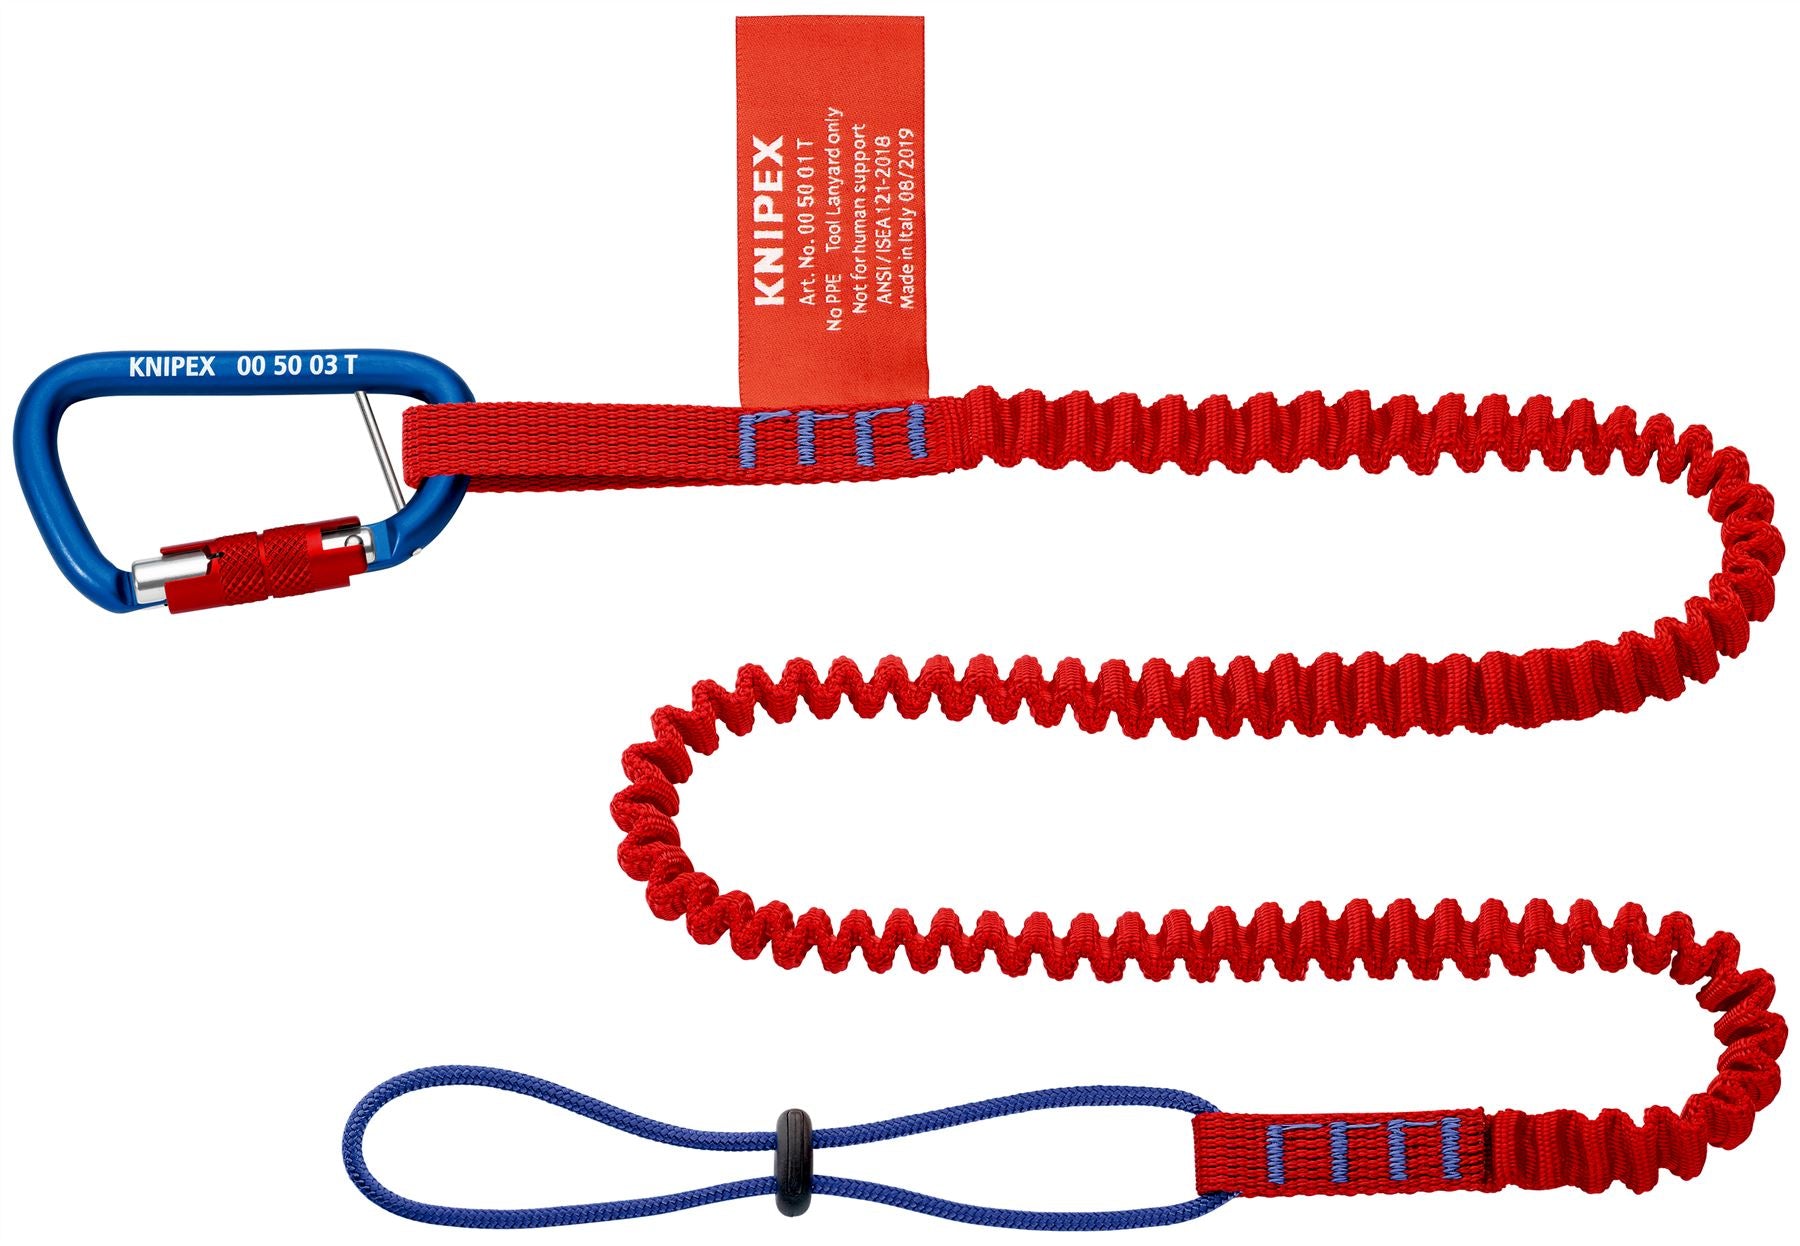 Knipex Tether with Fixated Carabiner Tethering System Set Lanyard 1.5kg Max Load 00 50 05 T BK